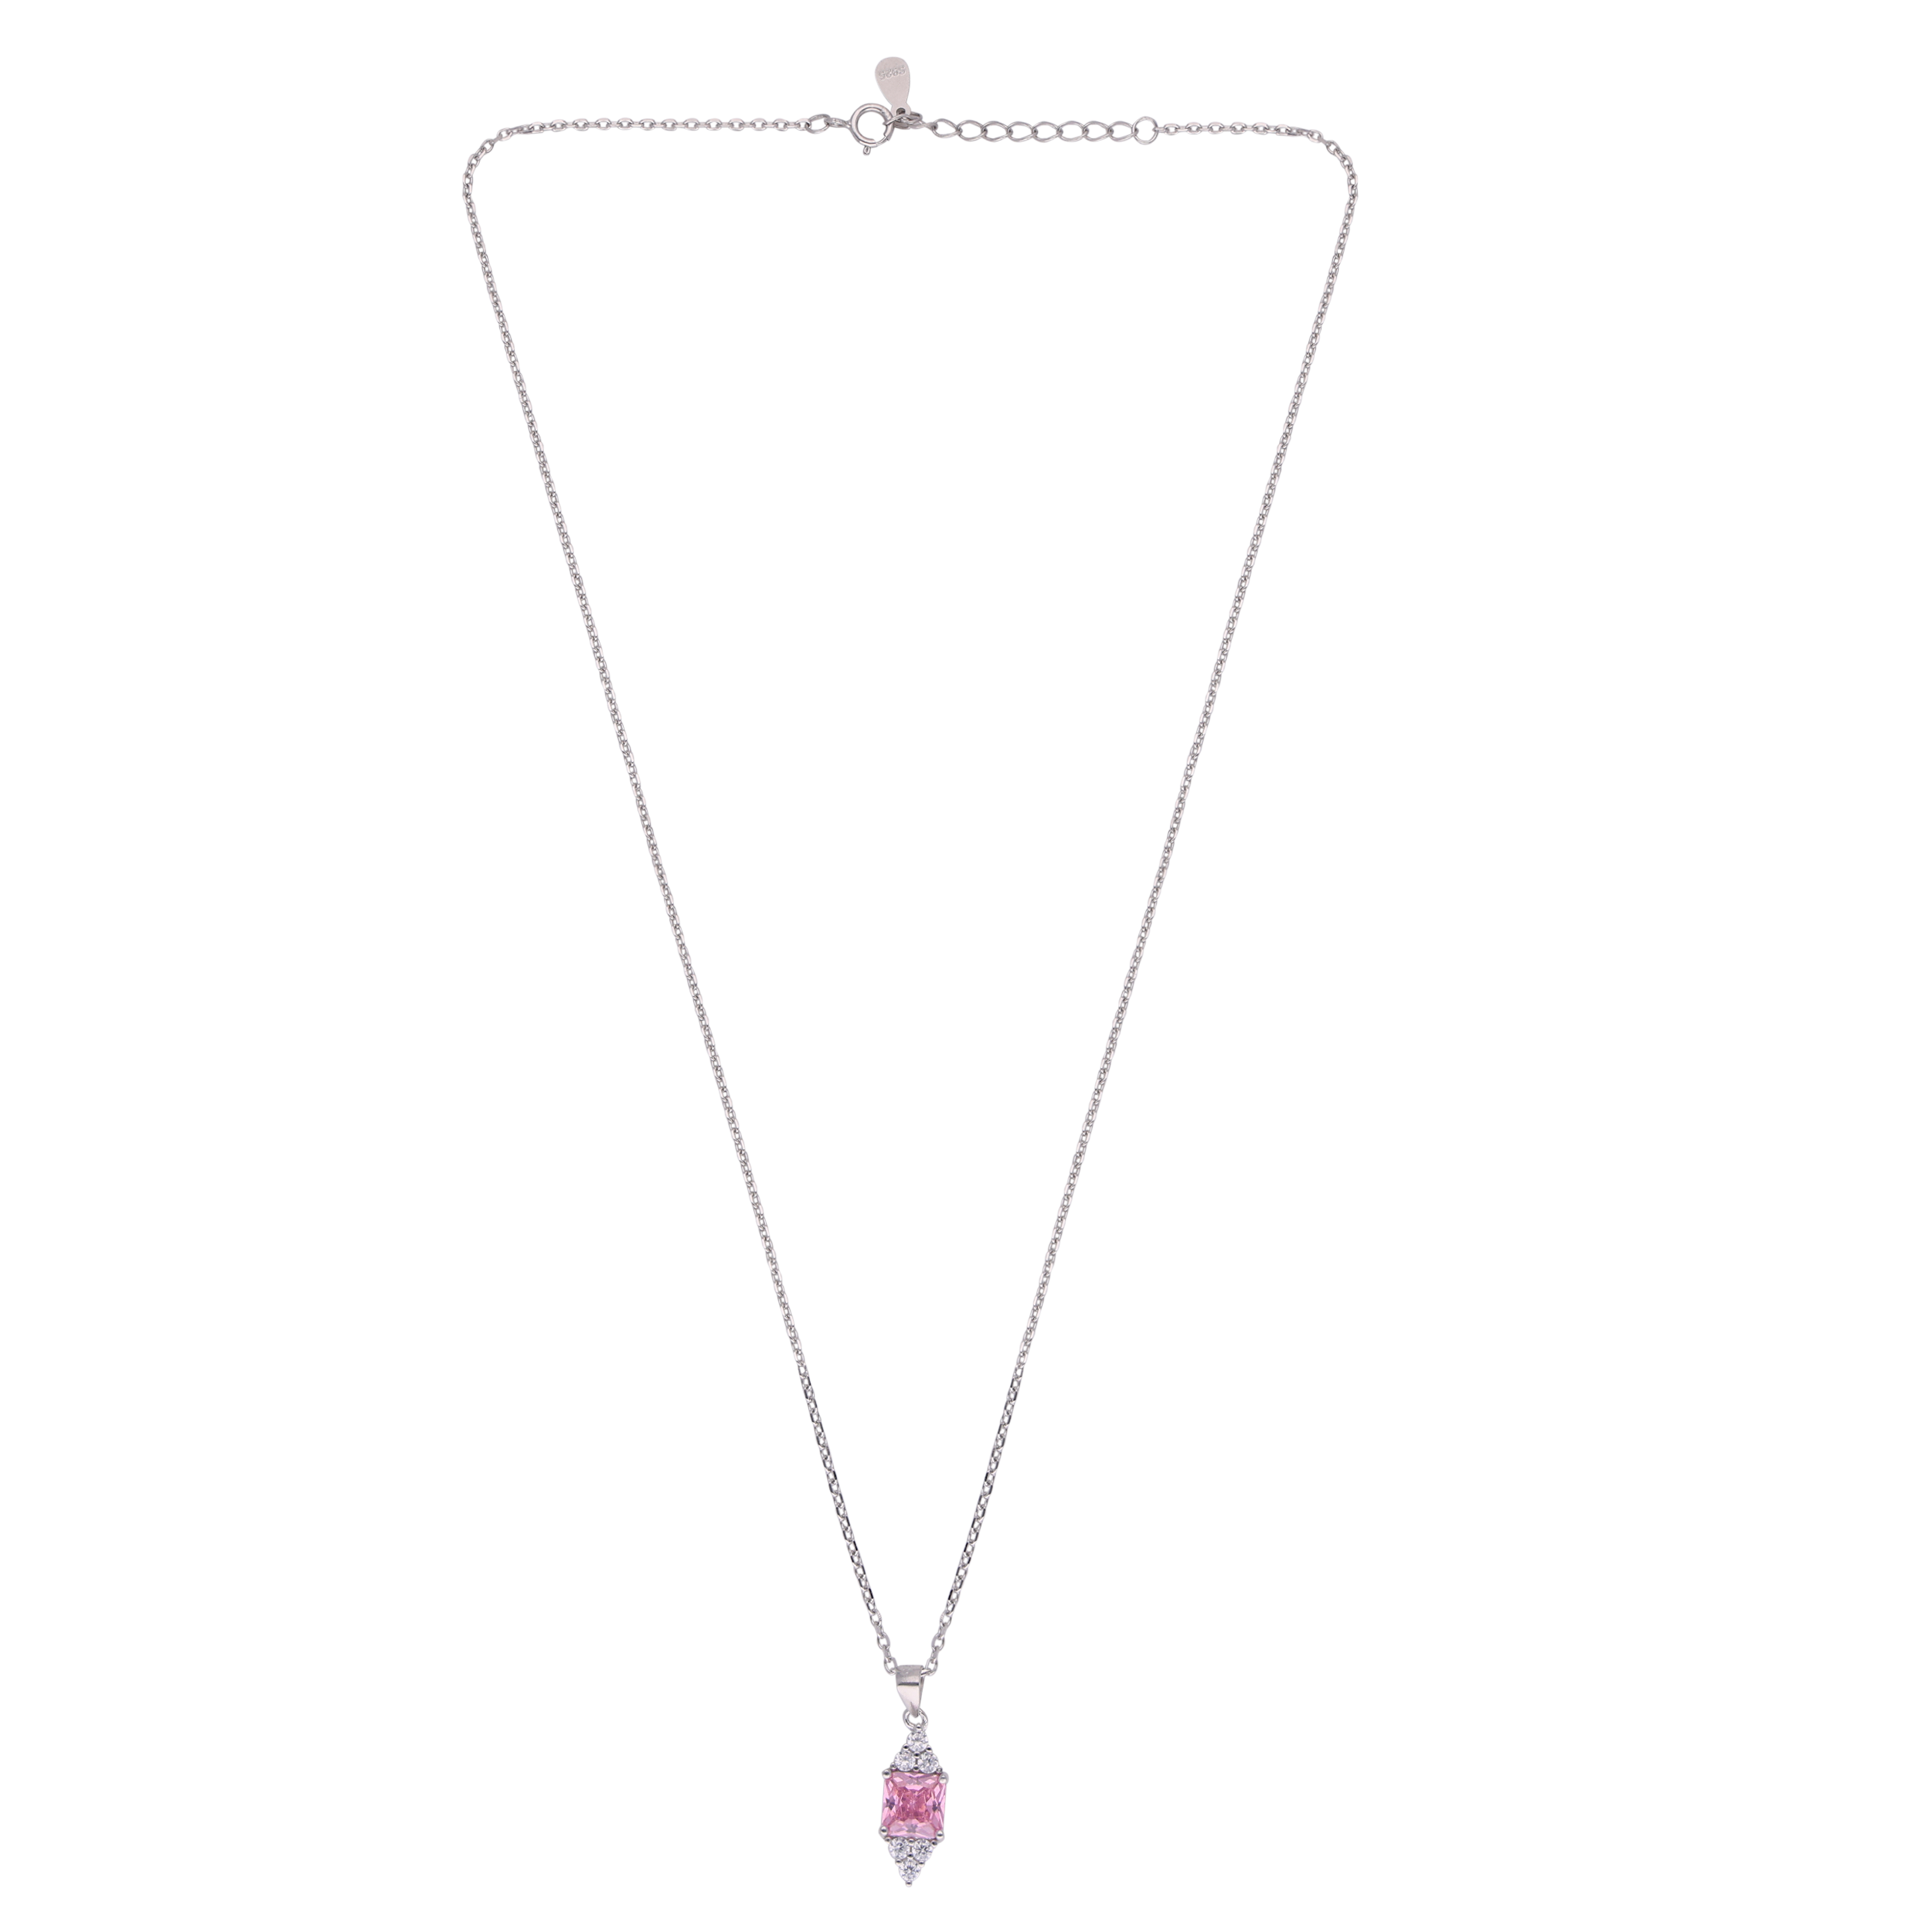 Radiant Bloom: Pendant Chain with Pink Cubic Zirconia  | SKU: 0019281704, 0019281612, 0019281735, 0019272276